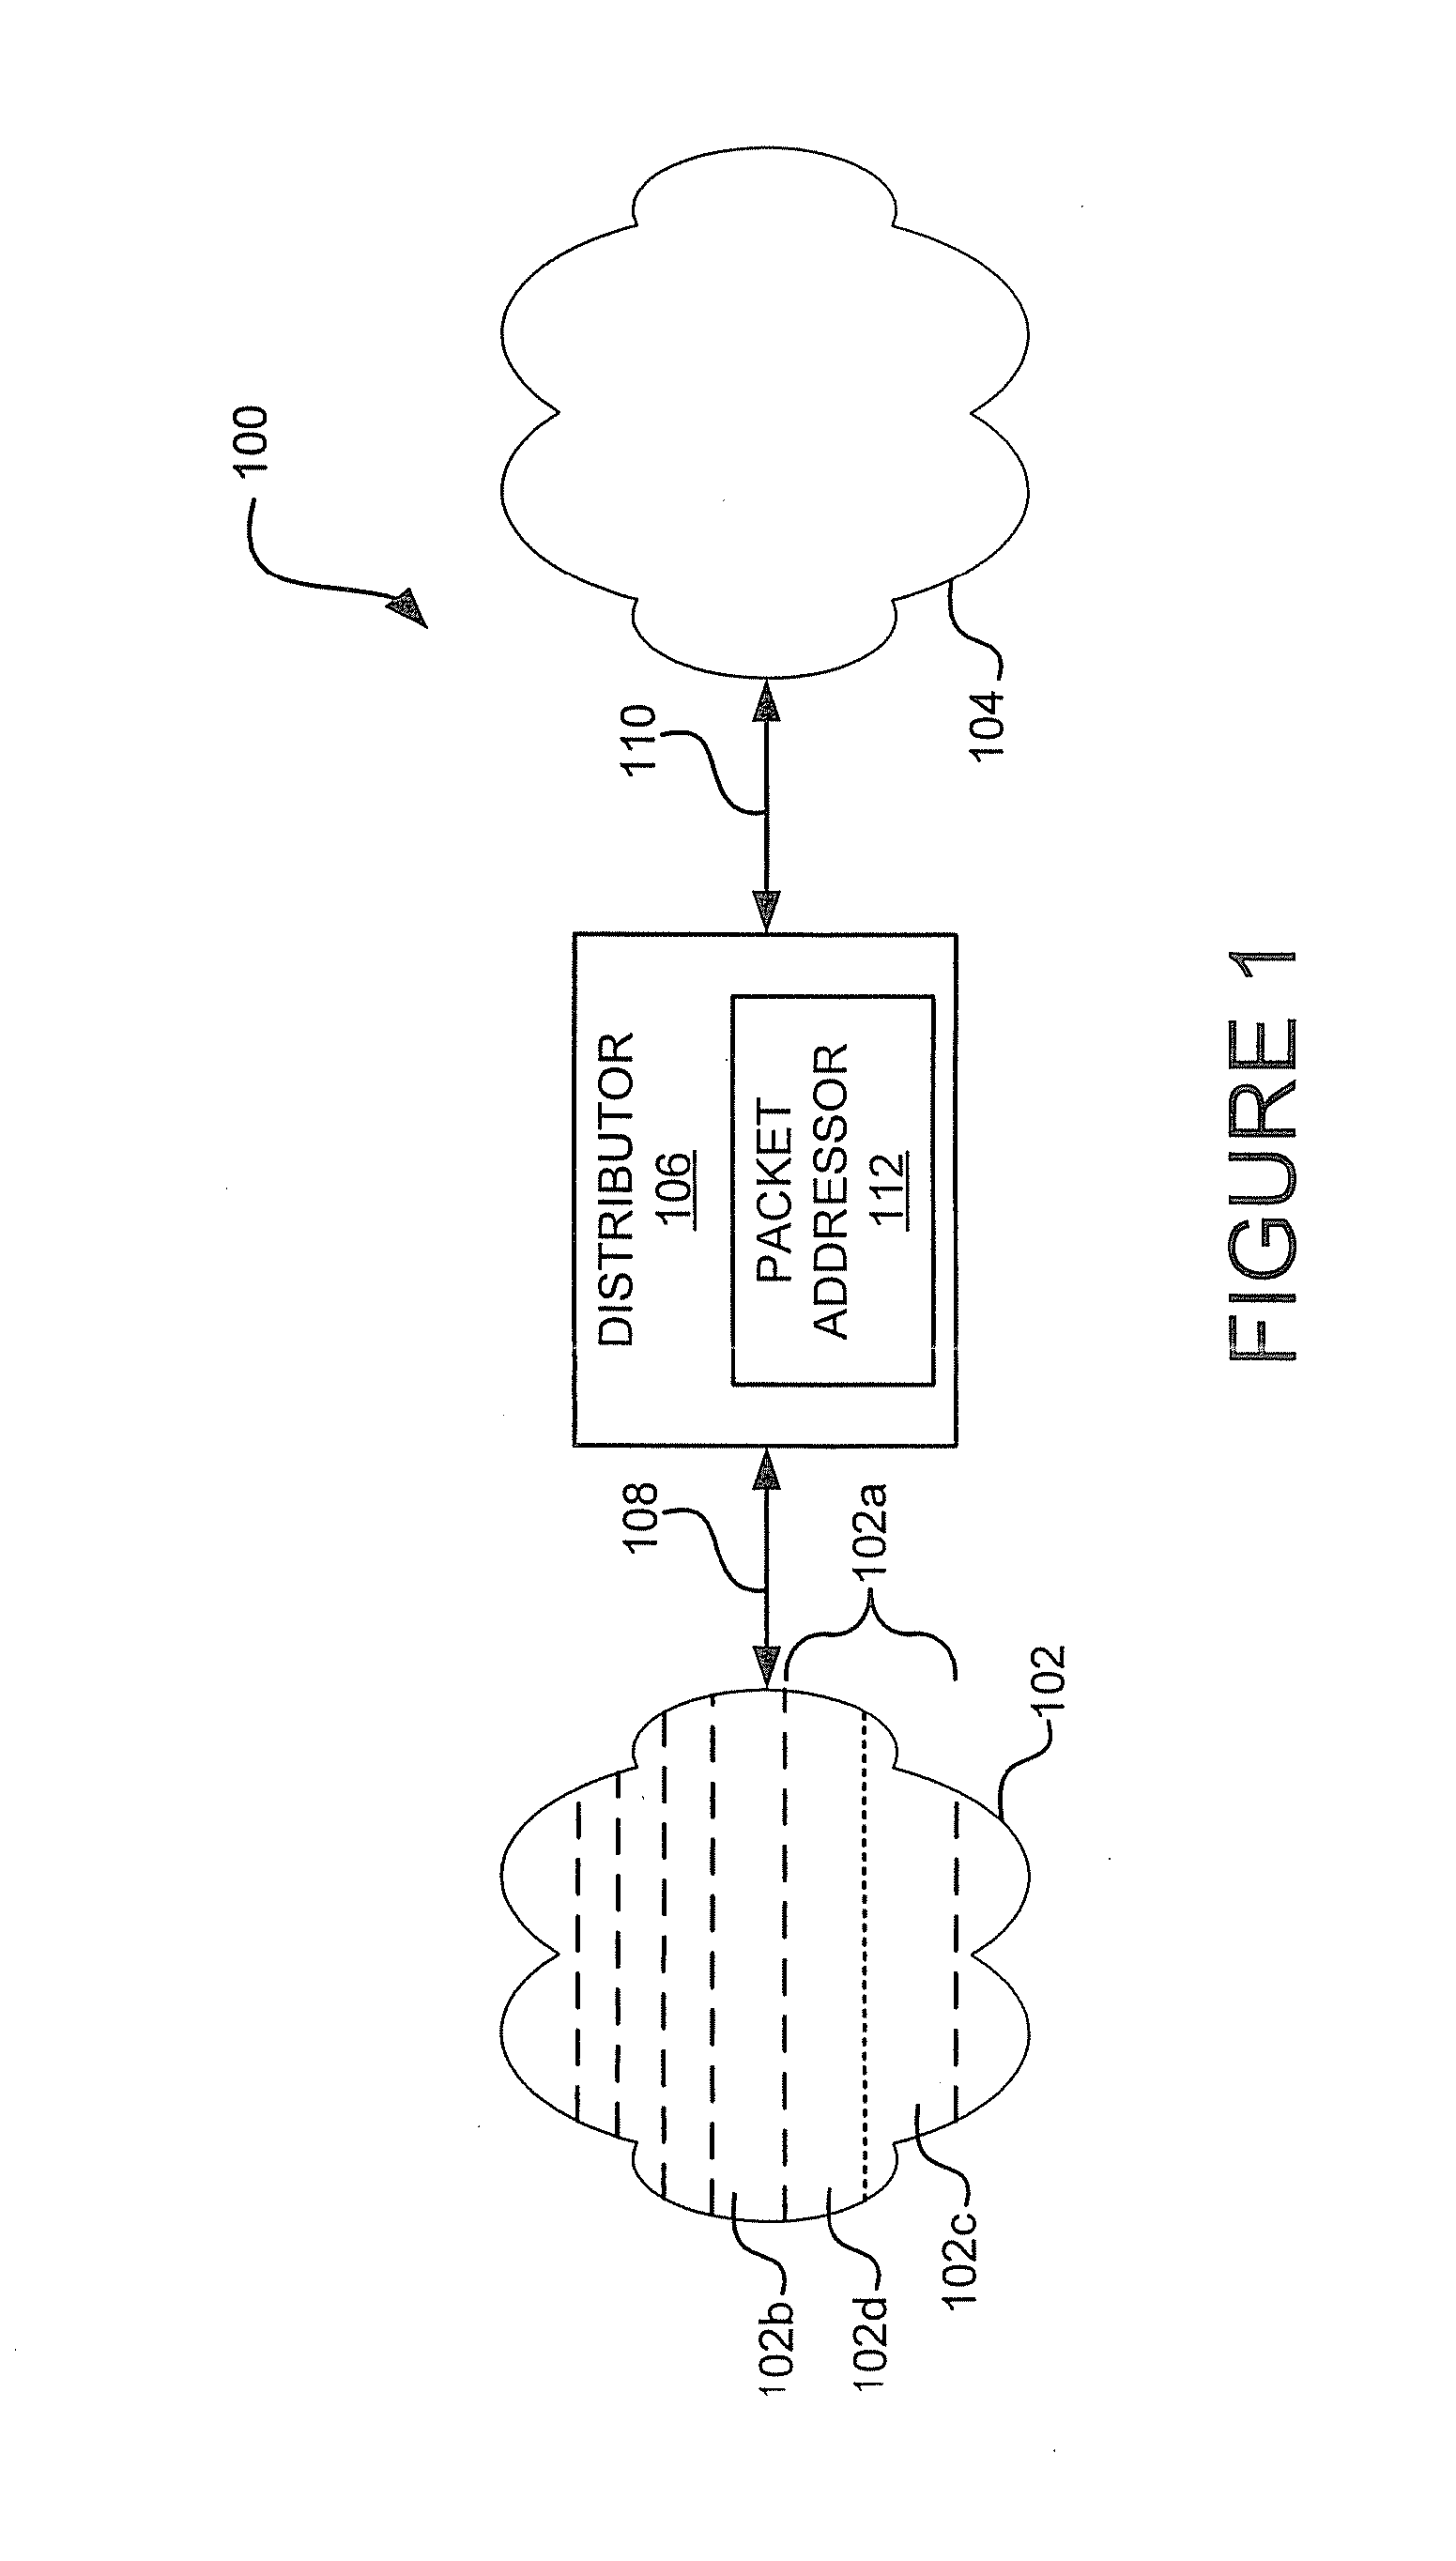 System and method for assembling a data packet